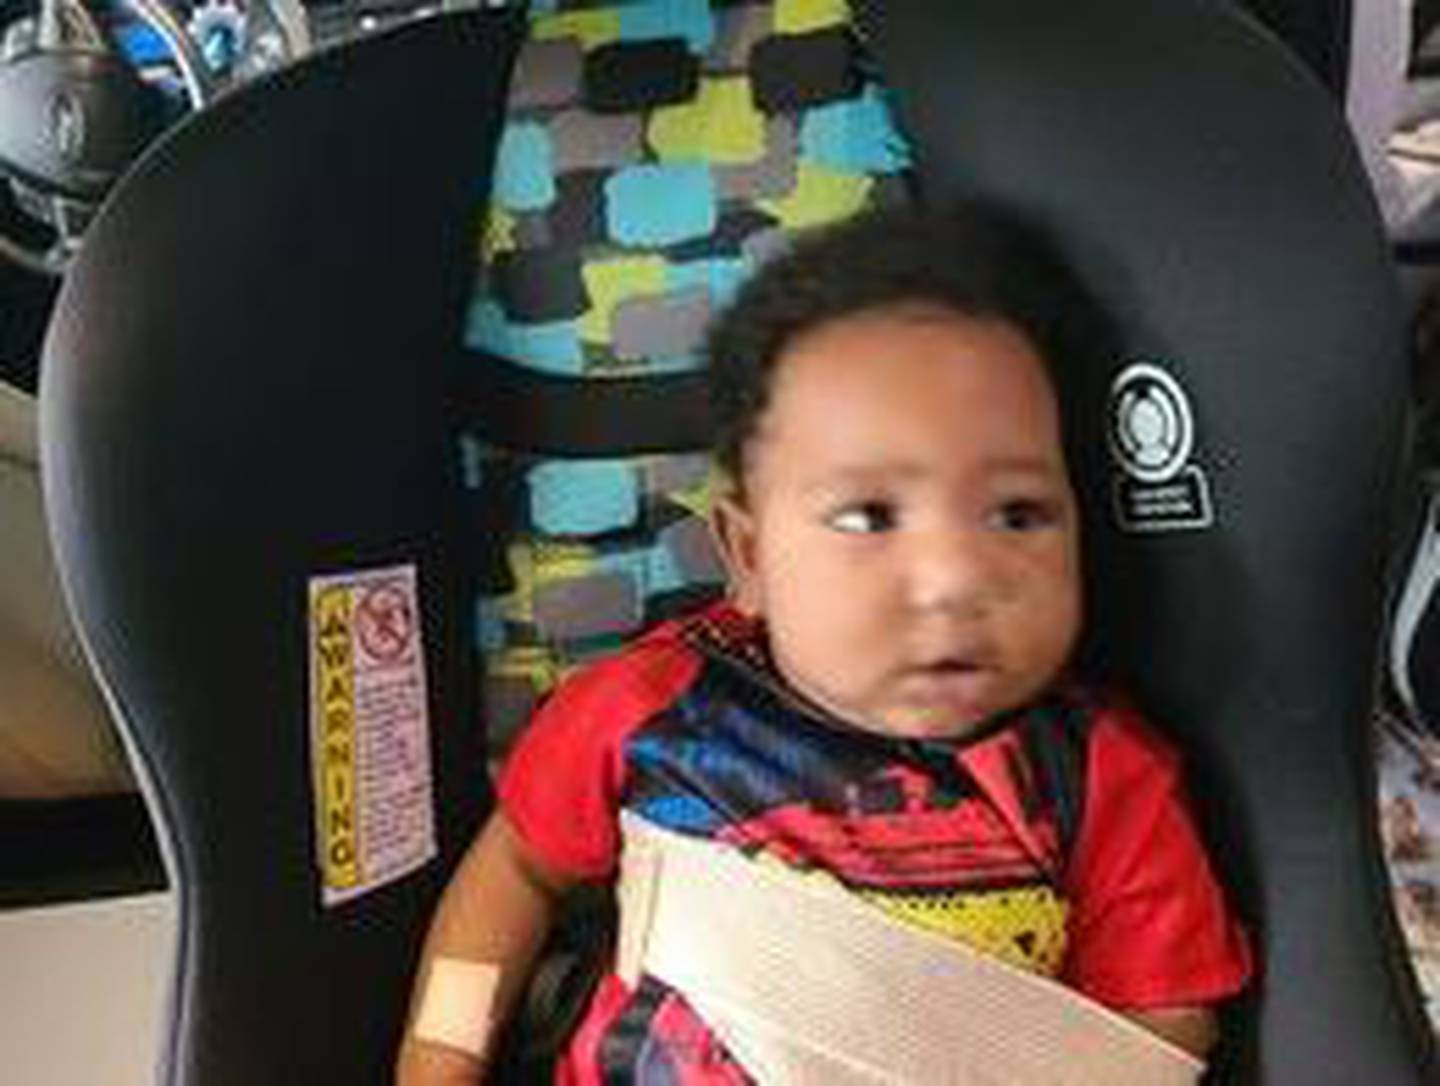 6-month-old Salem is recovering and has been released from the hospital.